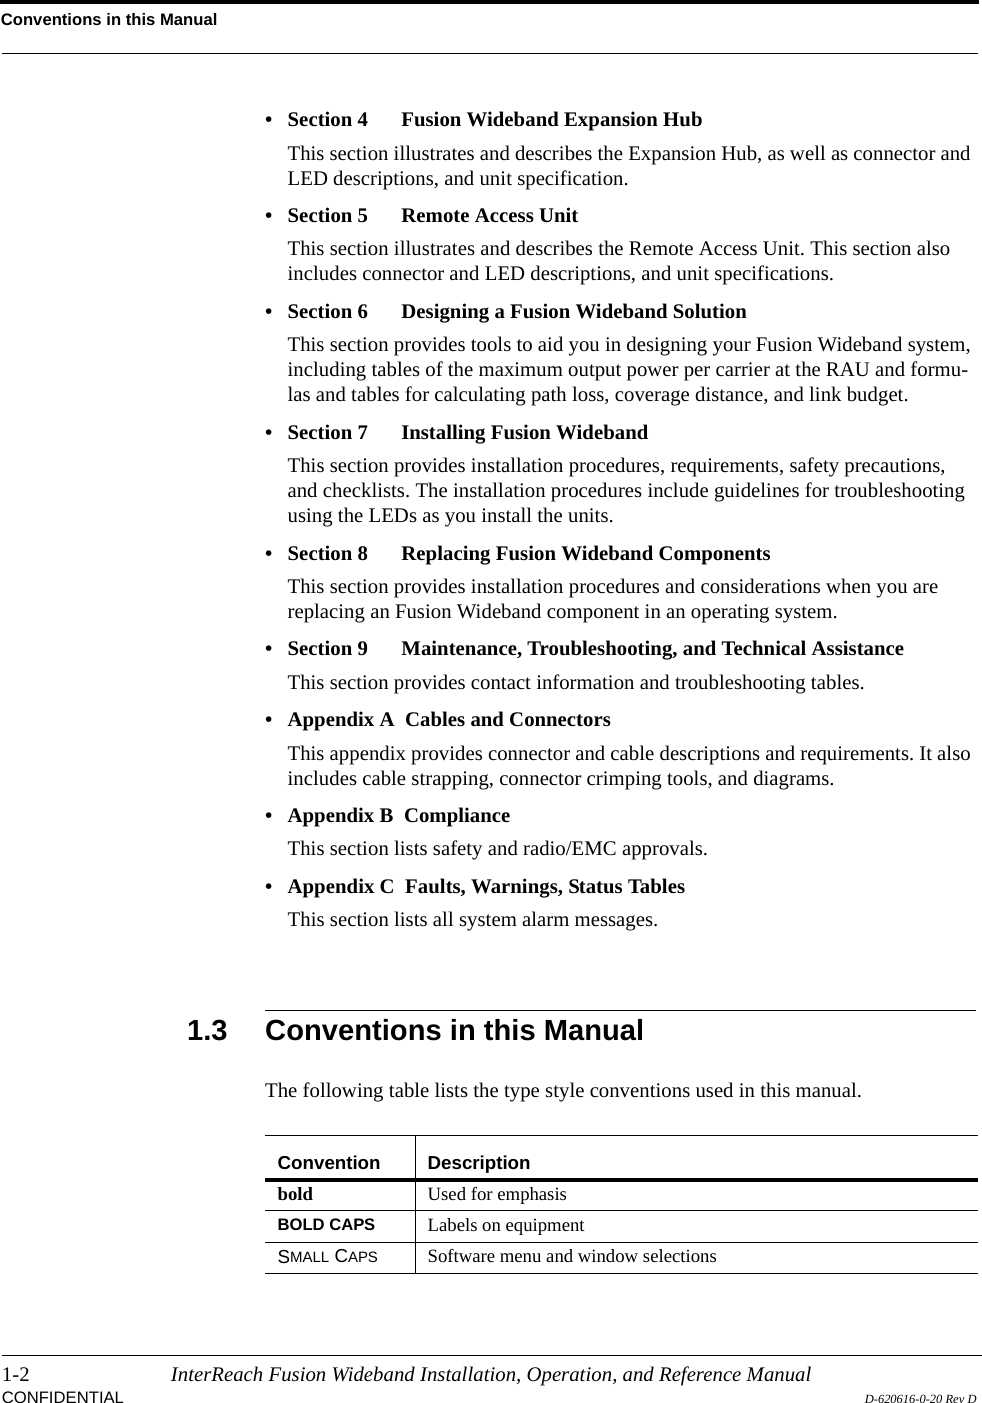 Conventions in this Manual1-2 InterReach Fusion Wideband Installation, Operation, and Reference ManualCONFIDENTIAL D-620616-0-20 Rev D• Section 4   Fusion Wideband Expansion HubThis section illustrates and describes the Expansion Hub, as well as connector and LED descriptions, and unit specification.• Section 5   Remote Access UnitThis section illustrates and describes the Remote Access Unit. This section also includes connector and LED descriptions, and unit specifications.• Section 6   Designing a Fusion Wideband SolutionThis section provides tools to aid you in designing your Fusion Wideband system, including tables of the maximum output power per carrier at the RAU and formu-las and tables for calculating path loss, coverage distance, and link budget.• Section 7   Installing Fusion WidebandThis section provides installation procedures, requirements, safety precautions, and checklists. The installation procedures include guidelines for troubleshooting using the LEDs as you install the units.• Section 8   Replacing Fusion Wideband ComponentsThis section provides installation procedures and considerations when you are replacing an Fusion Wideband component in an operating system.• Section 9  Maintenance, Troubleshooting, and Technical AssistanceThis section provides contact information and troubleshooting tables.• Appendix A  Cables and ConnectorsThis appendix provides connector and cable descriptions and requirements. It also includes cable strapping, connector crimping tools, and diagrams.• Appendix B  ComplianceThis section lists safety and radio/EMC approvals.• Appendix C  Faults, Warnings, Status TablesThis section lists all system alarm messages.1.3 Conventions in this ManualThe following table lists the type style conventions used in this manual.Convention Descriptionbold Used for emphasisBOLD CAPS Labels on equipmentSMALL CAPS Software menu and window selections